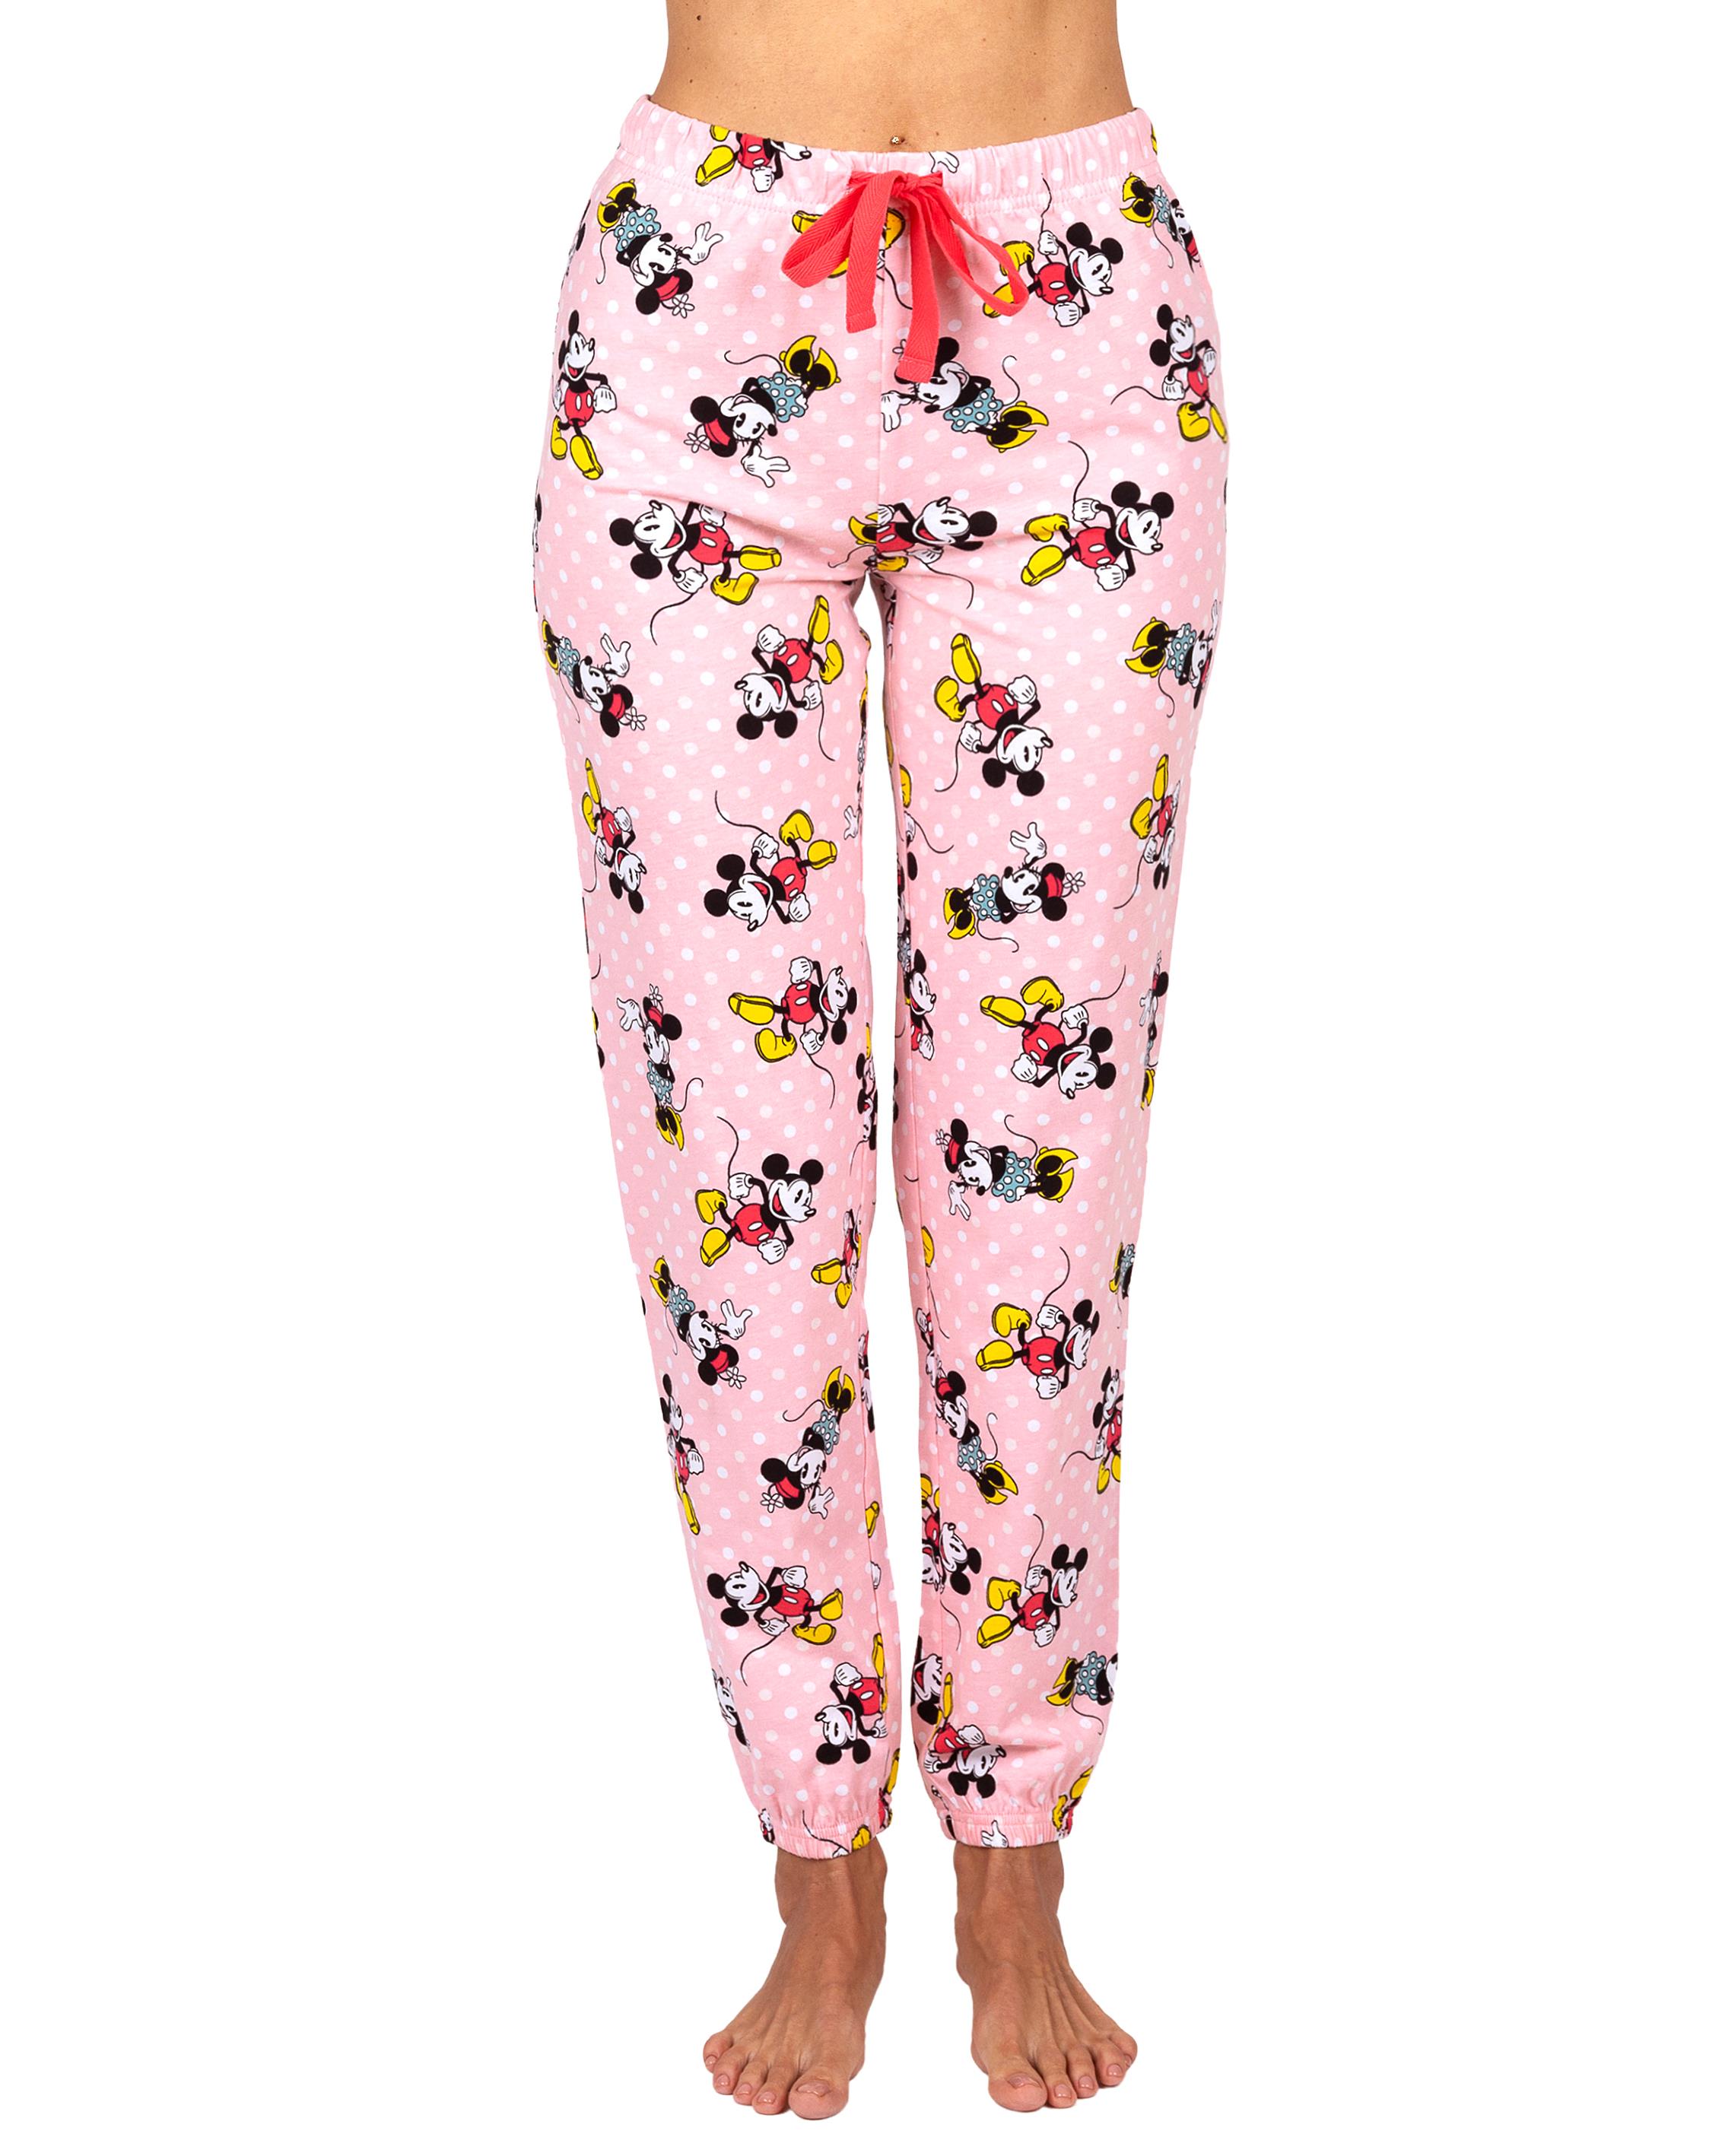 Disney Mickey and Minnie Mouse Womens Cotton Pajama Pants, Sleepwear Bottoms, Mickey and Minnie, Size: 2X, Mickey Mouse - image 3 of 4